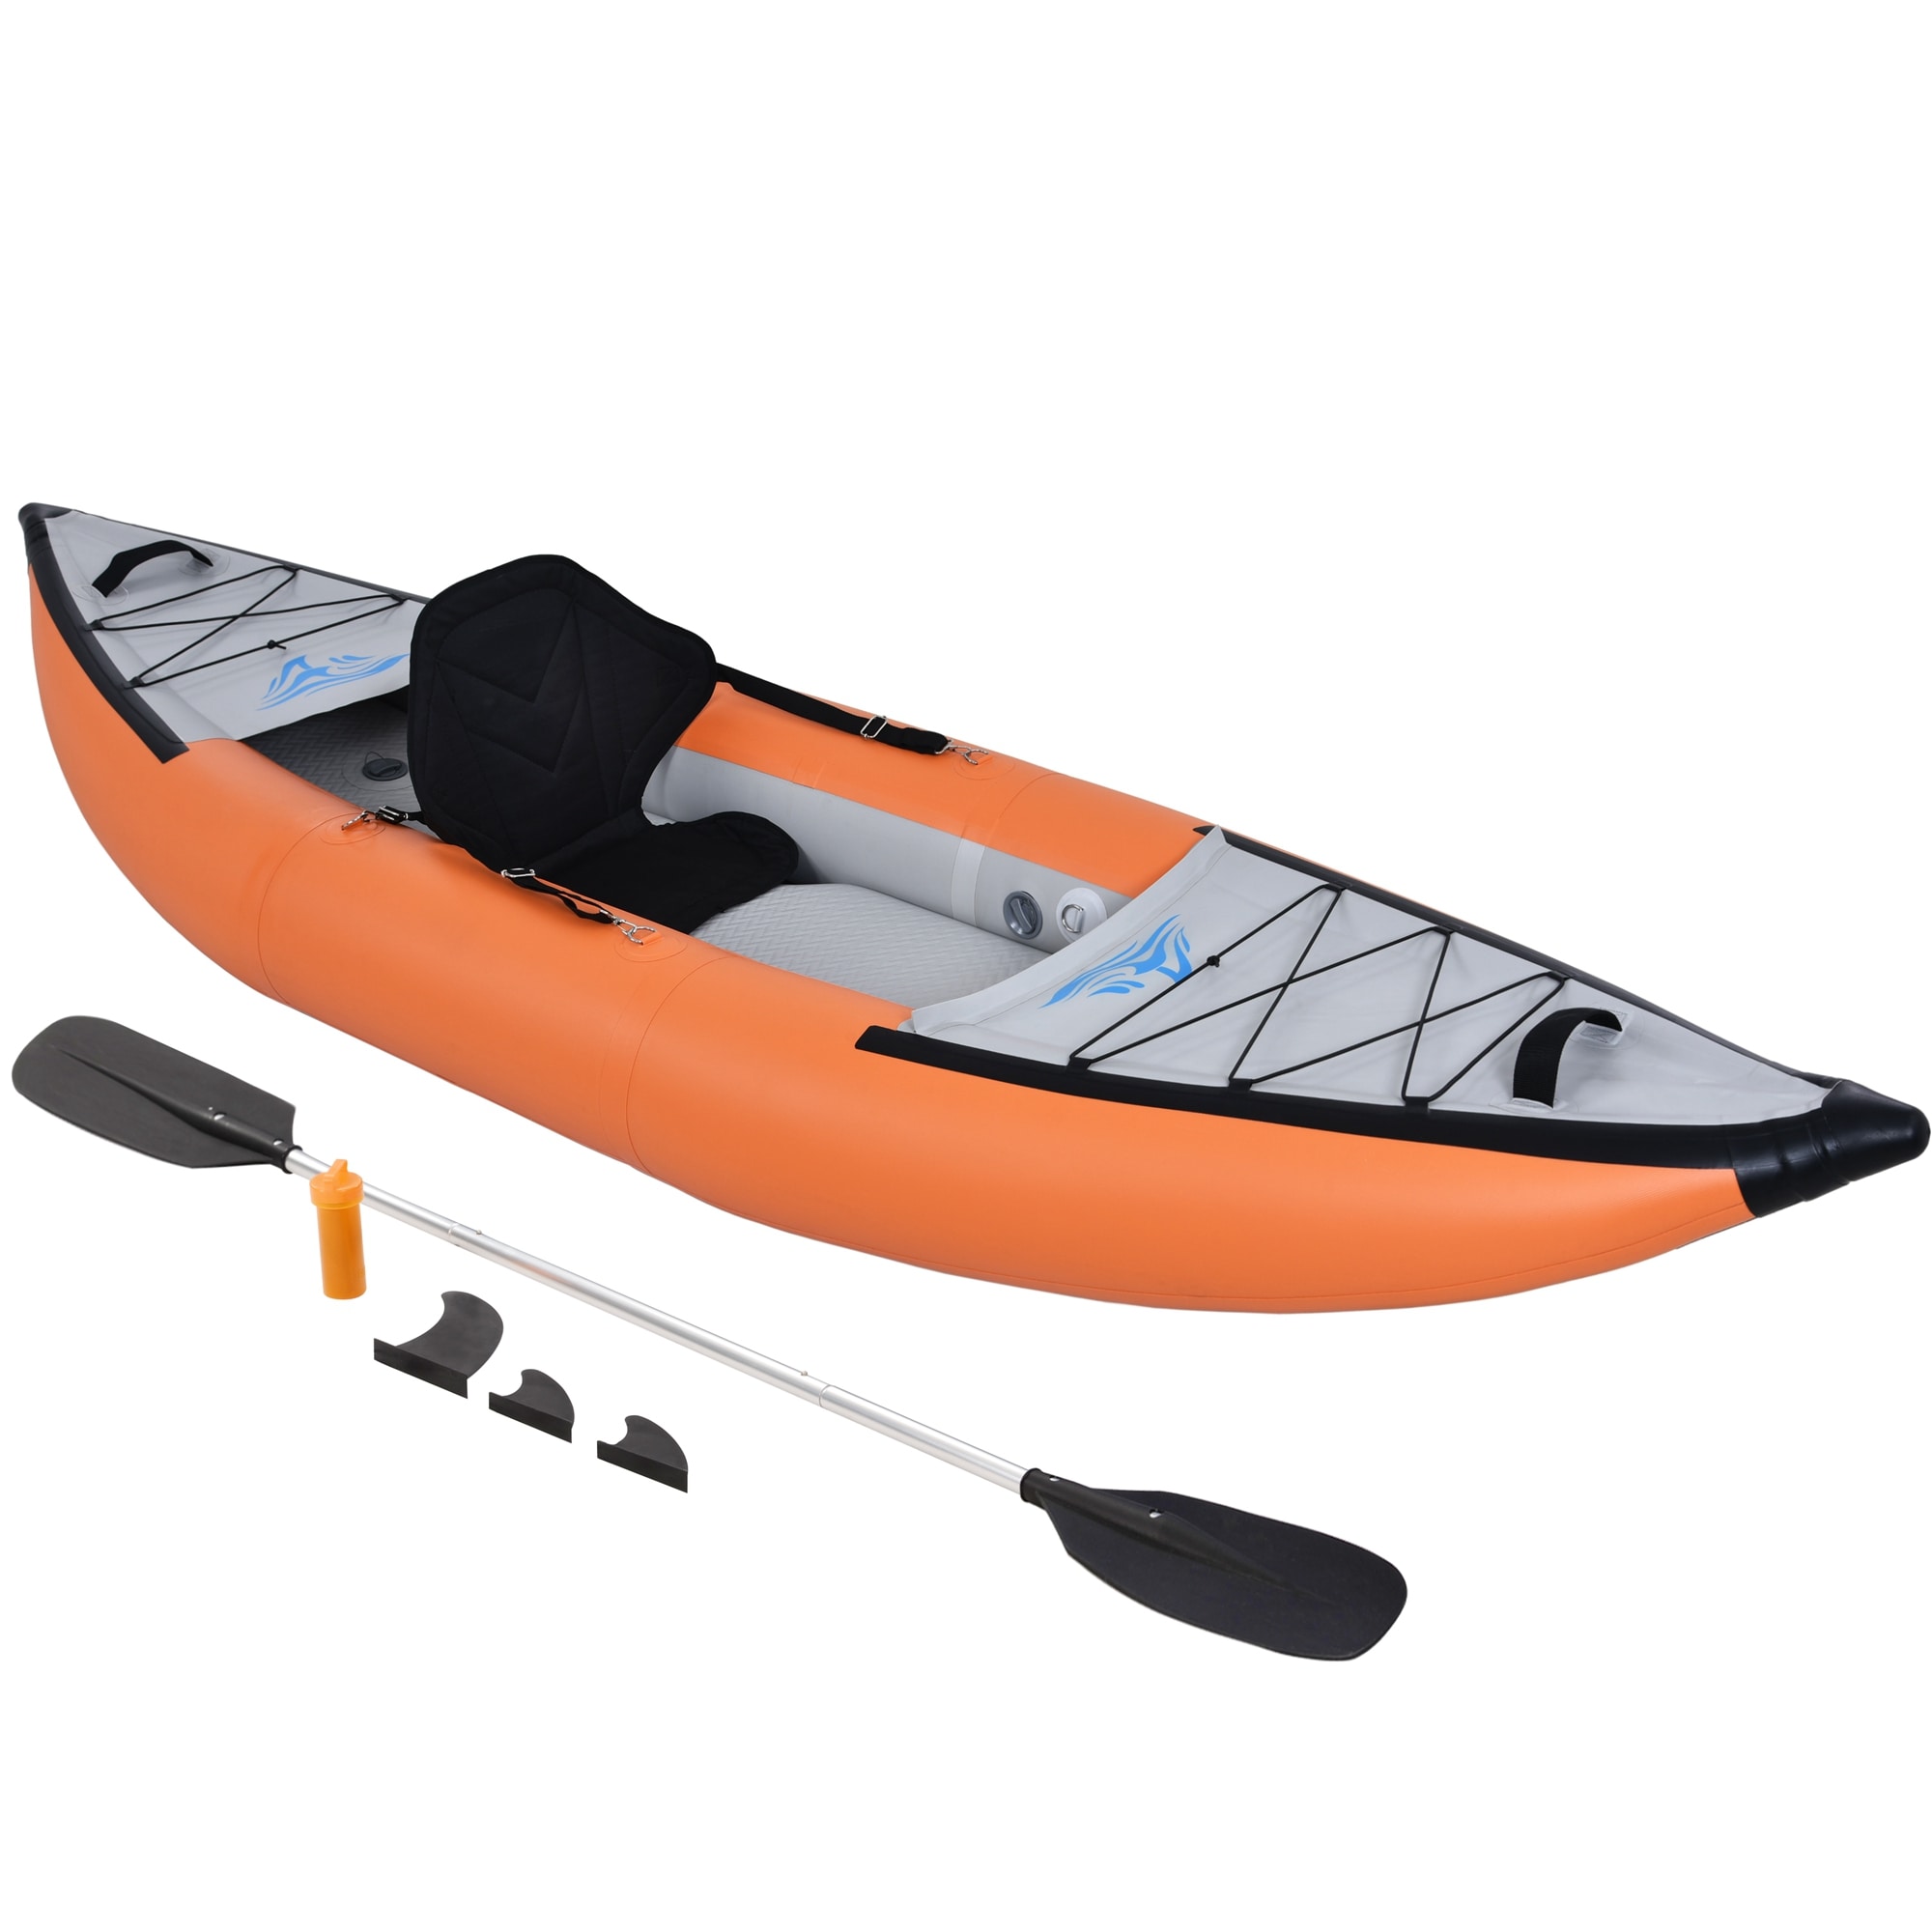 Flynama Sit-on-top Person 12-ft Kayak in the department at Lowes.com